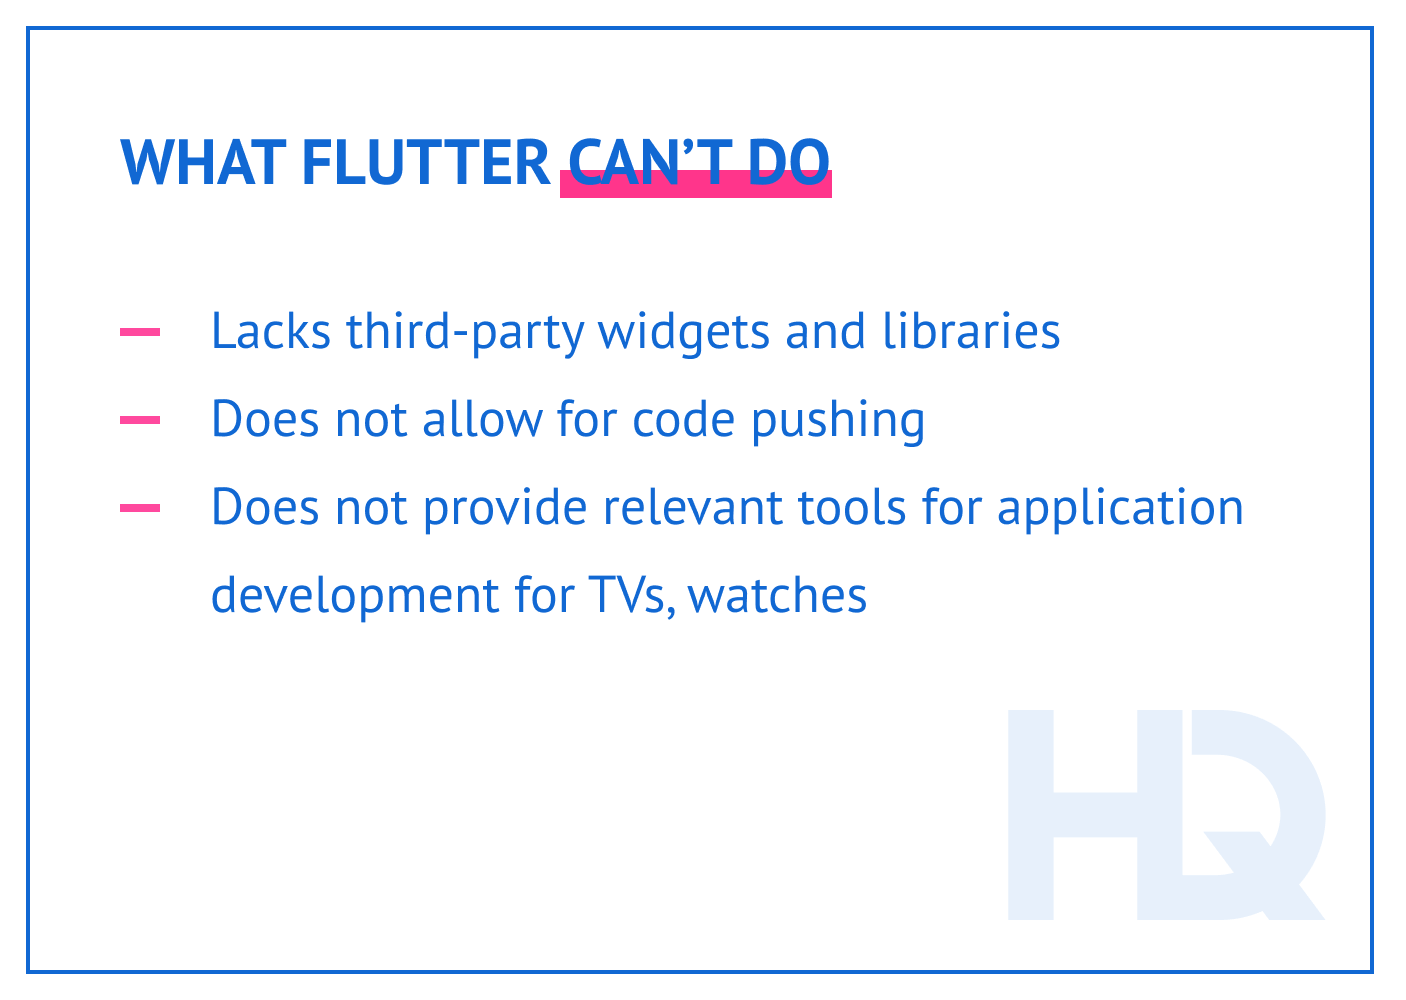 What Flutter can't do, the drawbacks.